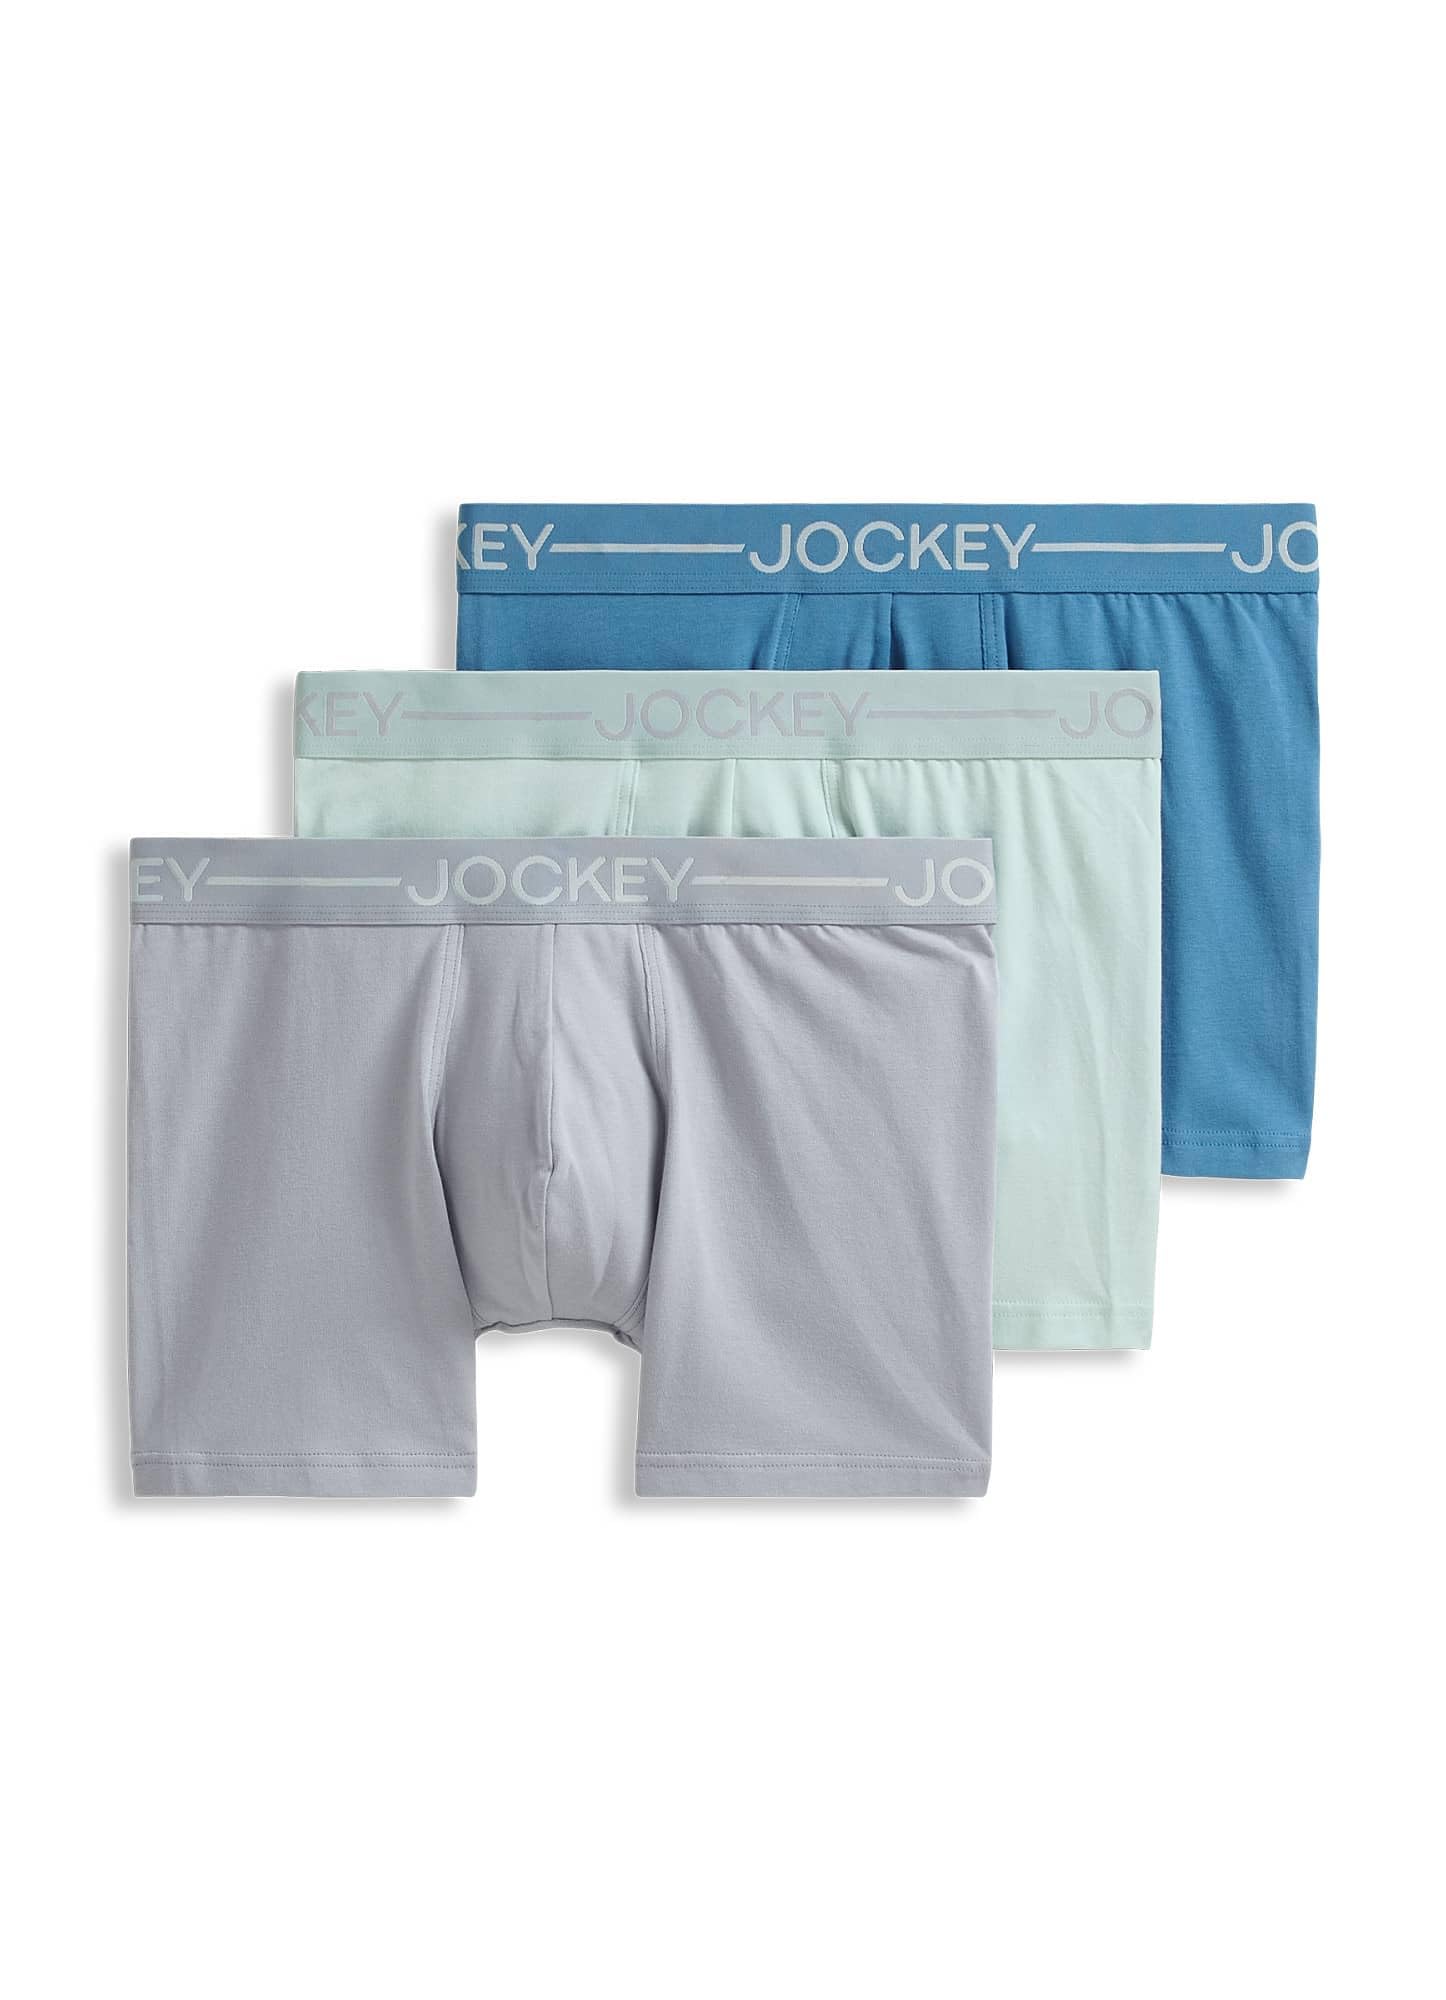 3-Pack Jockey Men's Organic Cotton Stretch 4" or 6.5" Boxer Brief (Subtle Mint/Grey Dove/Blue Chambray) $13.99 + Free Shipping